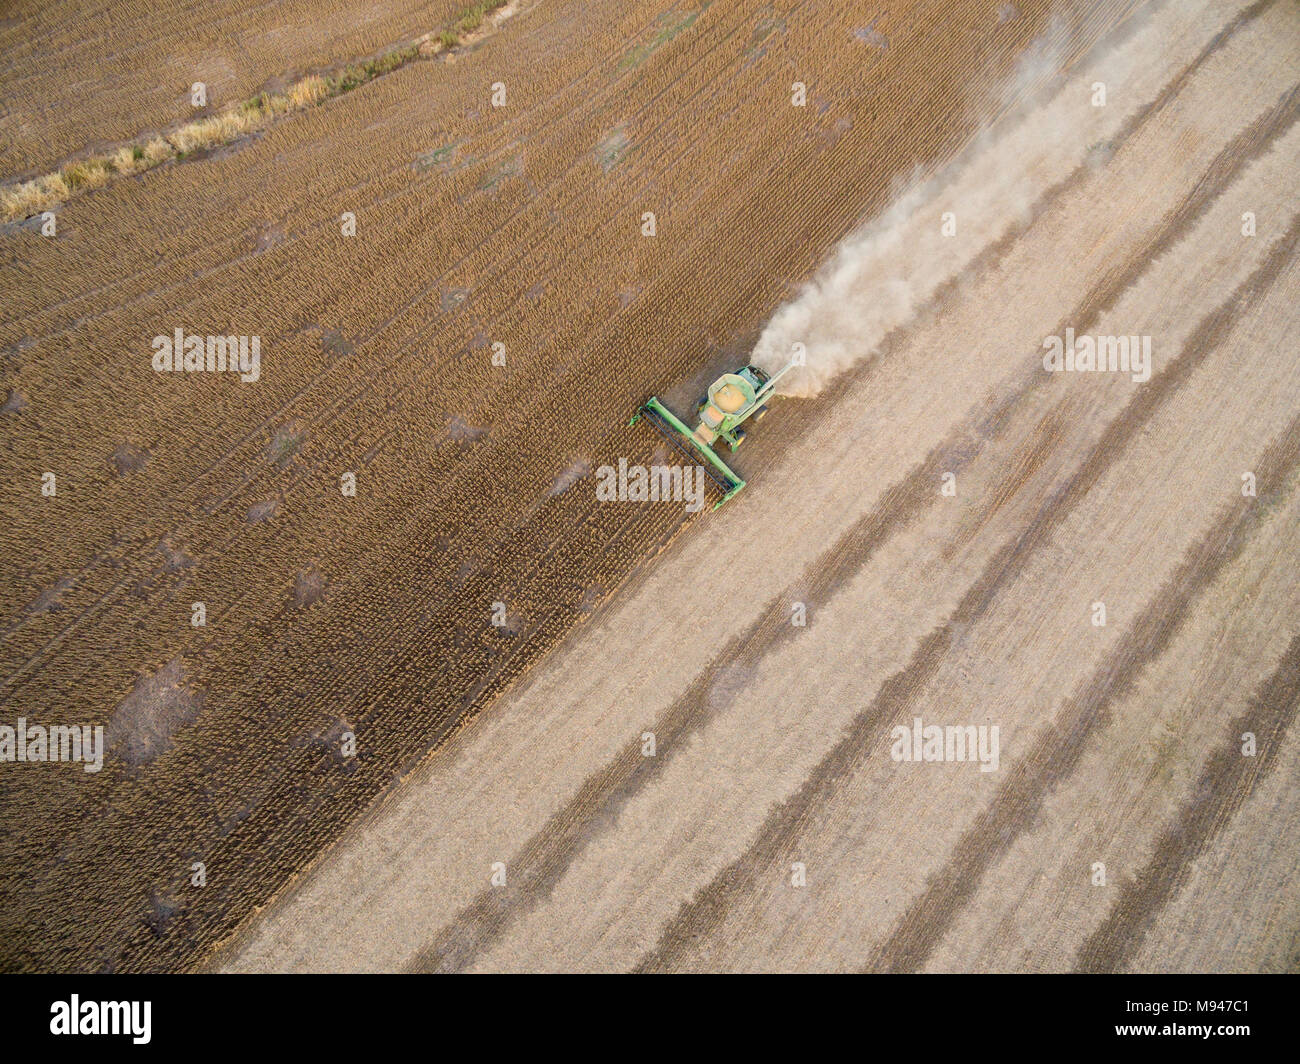 63801-09608 Soybean Harvest, John Deere combine harvesting soybeans - aerial - Marion Co. IL Stock Photo